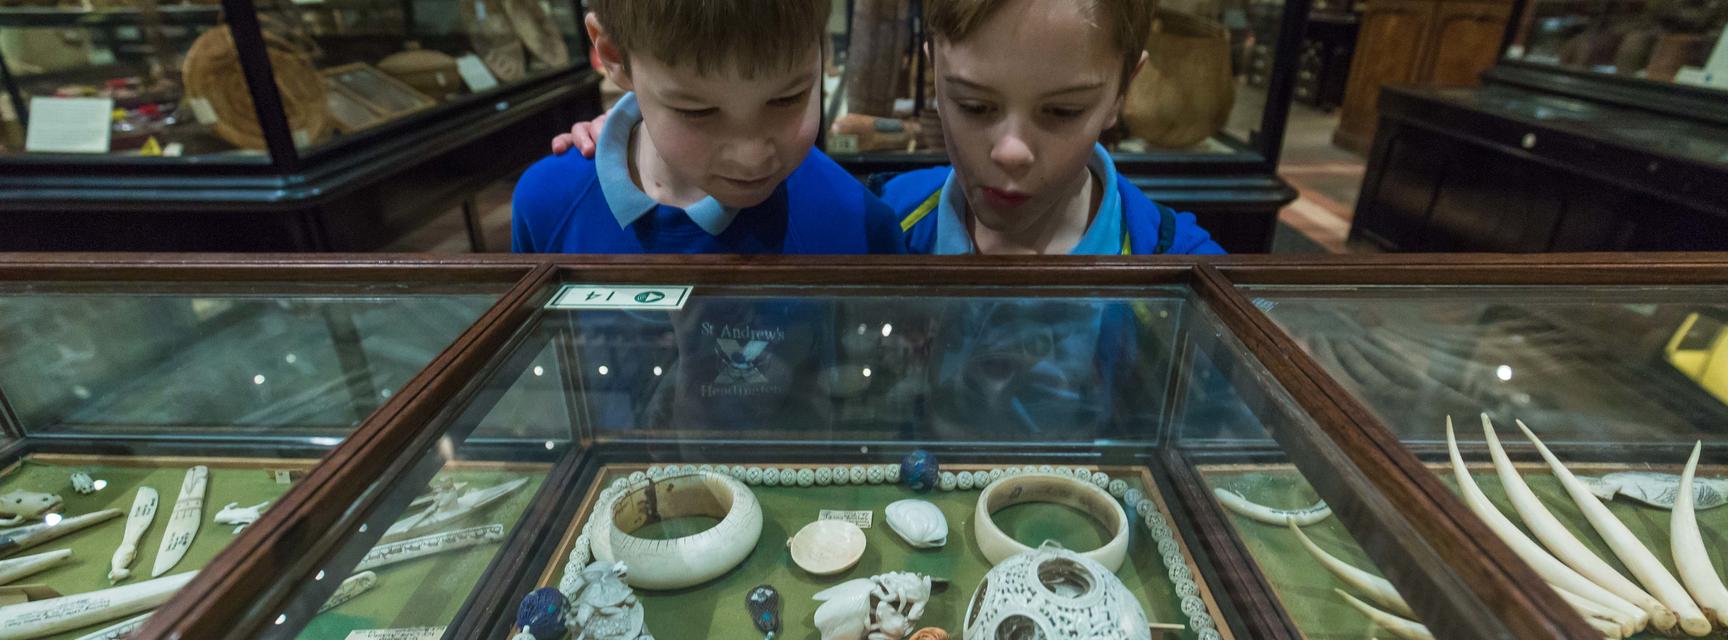 Two boys dressed in school uniform stare in wonder at objects intricately carved from ivory in the case in front of them.